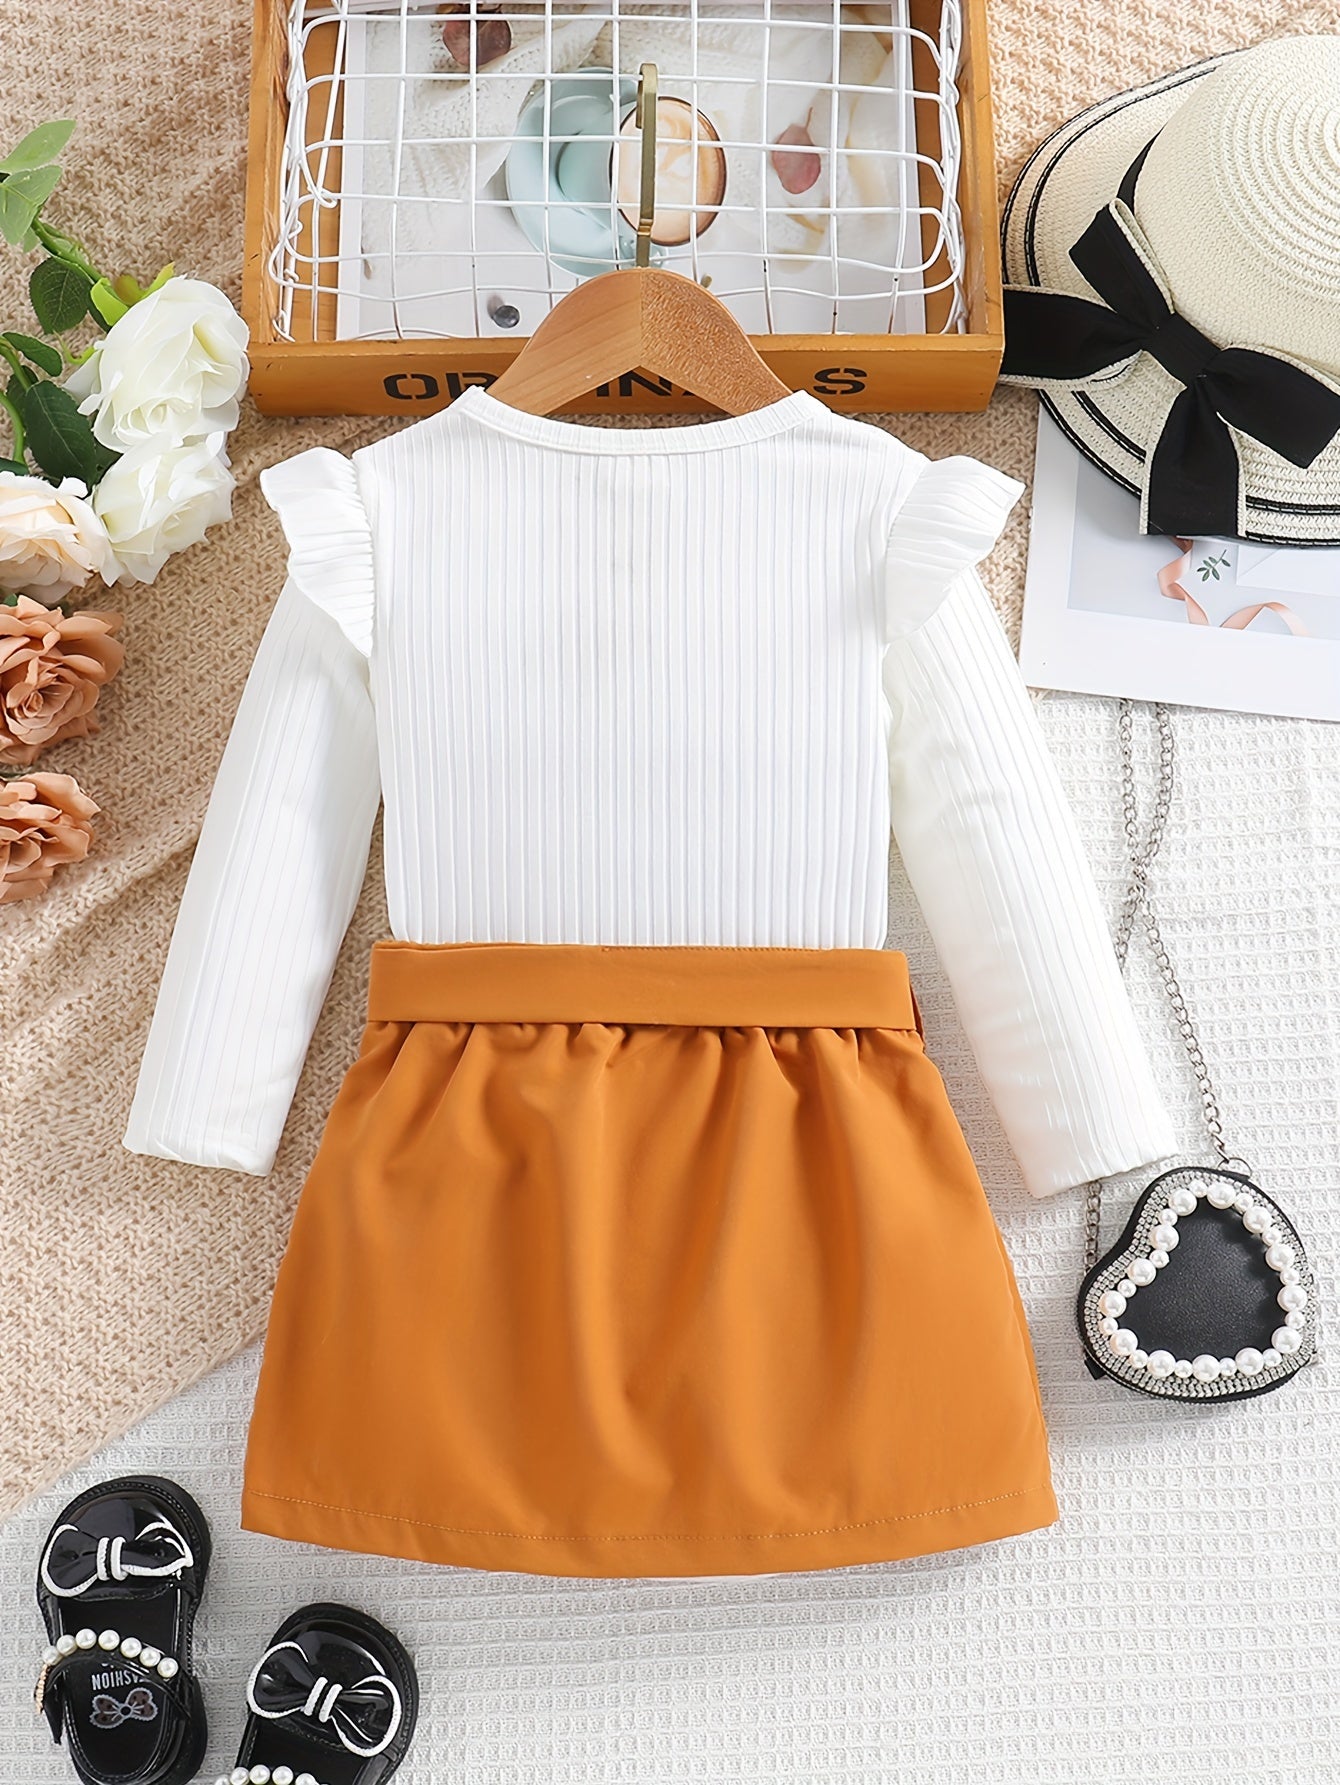 Baby Girl's Ribbed Knit Ruffle Long Sleeve Romper + Belted Pocket Skirt Set, Bodysuit Onesie Outfit, Newborn's Clothes